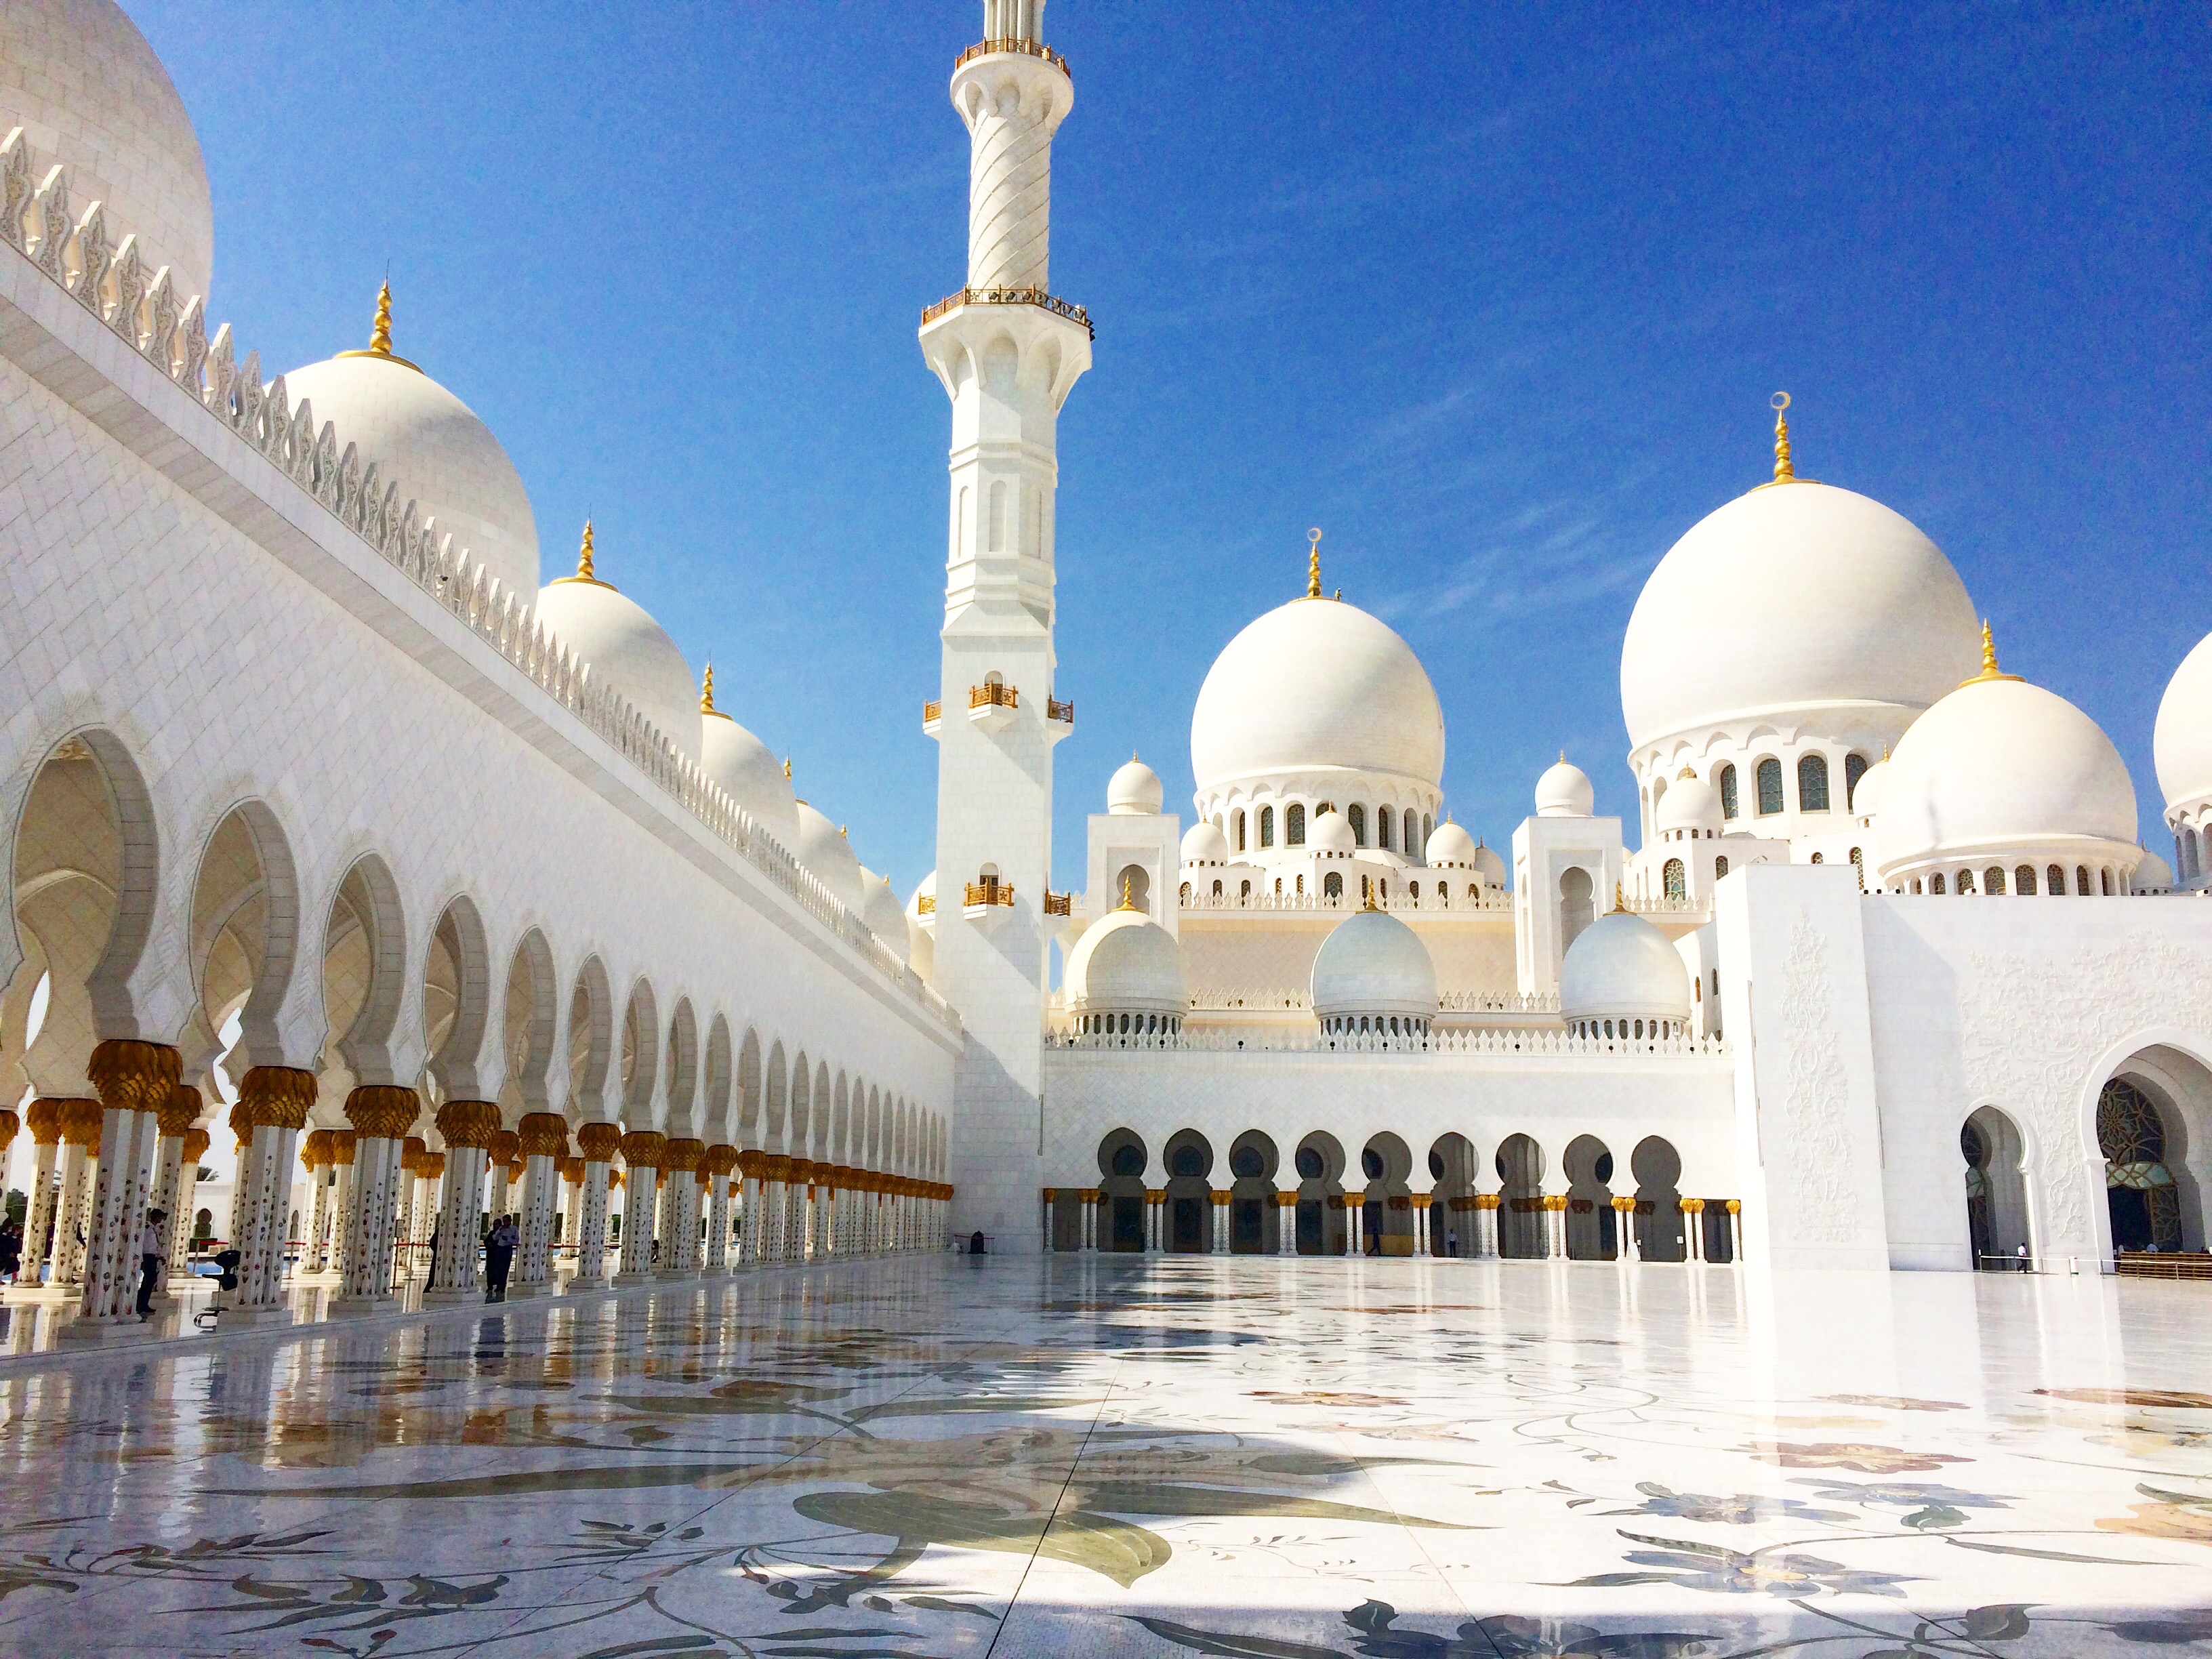 Visiting Sheikh Zayed Grand Mosque in Abu Dhabi from Dubai!